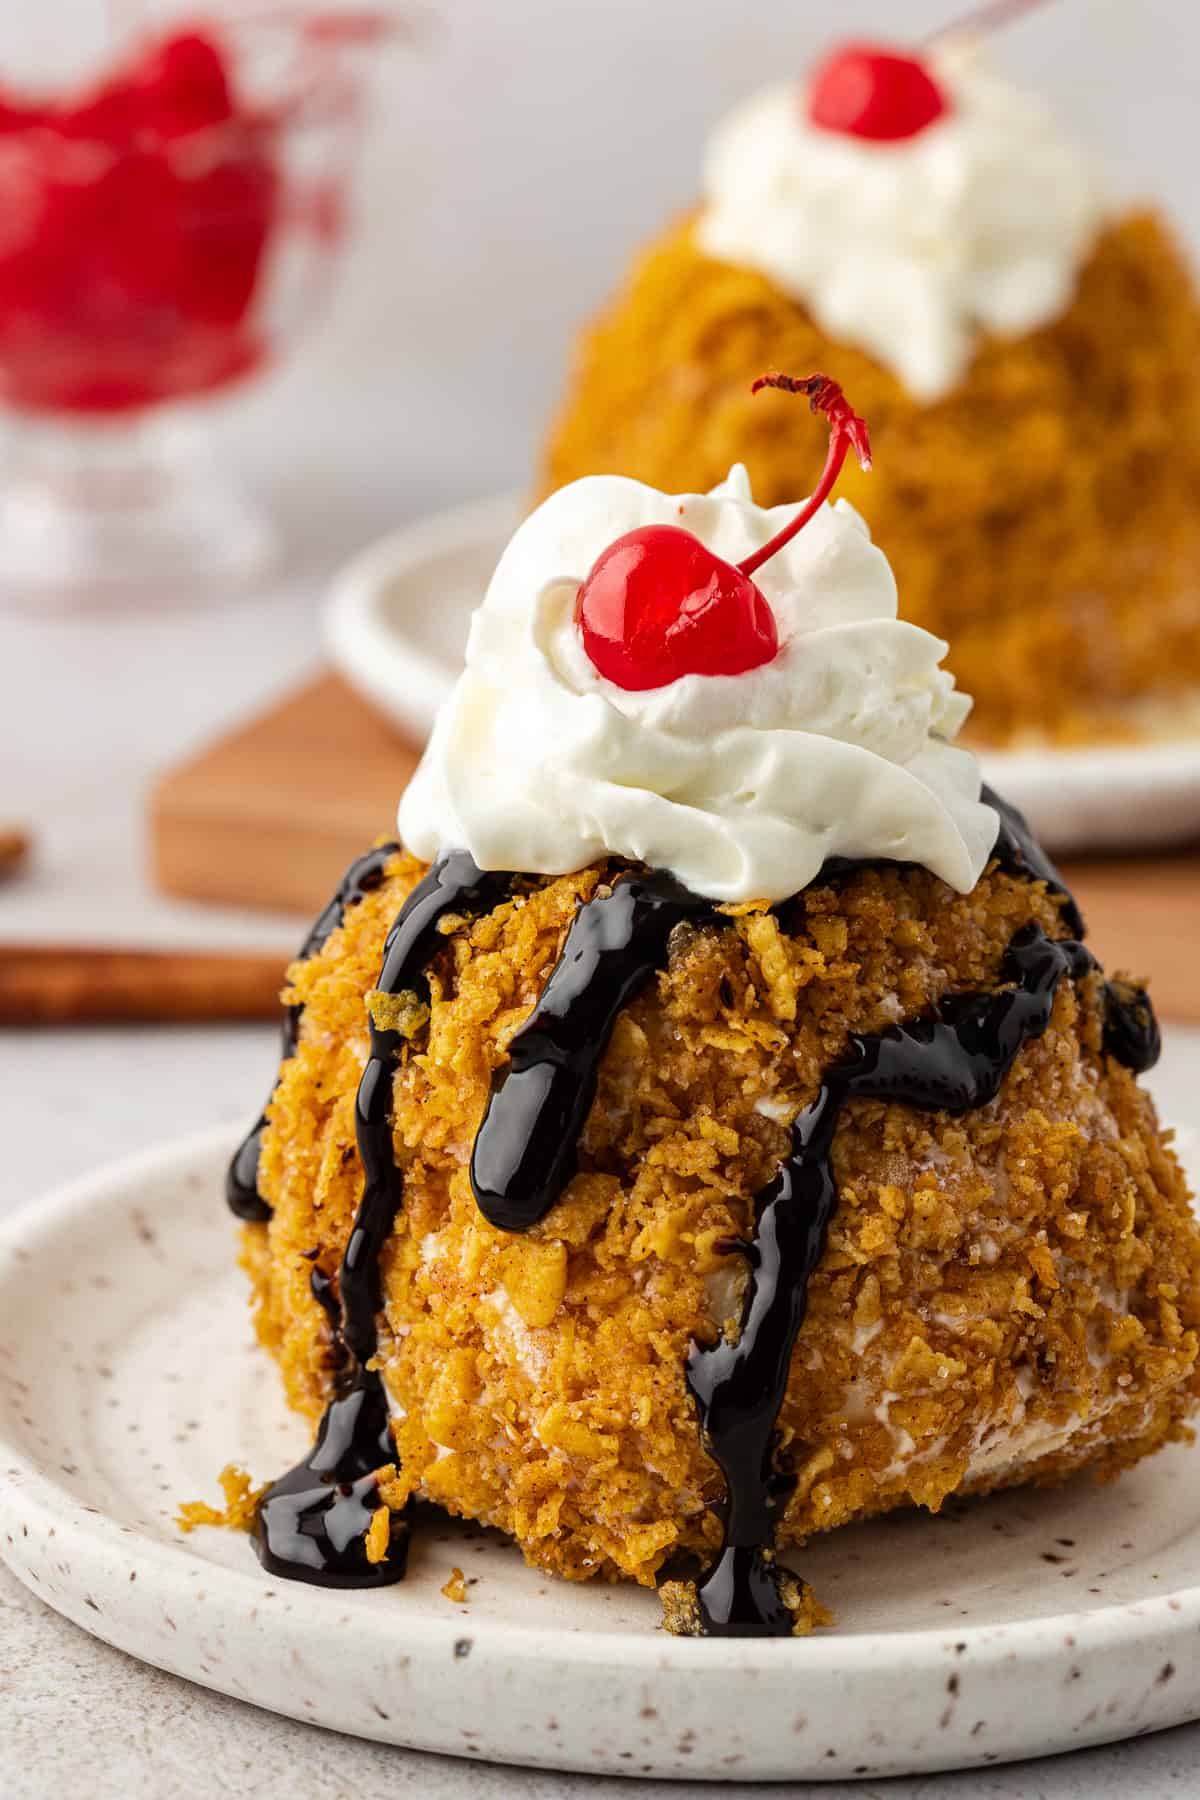 fried ice cream topping with chocolate syrup, whipped cream and a cherry on a small plate with another plate of fried ice cream and a bowl of cherries in the background